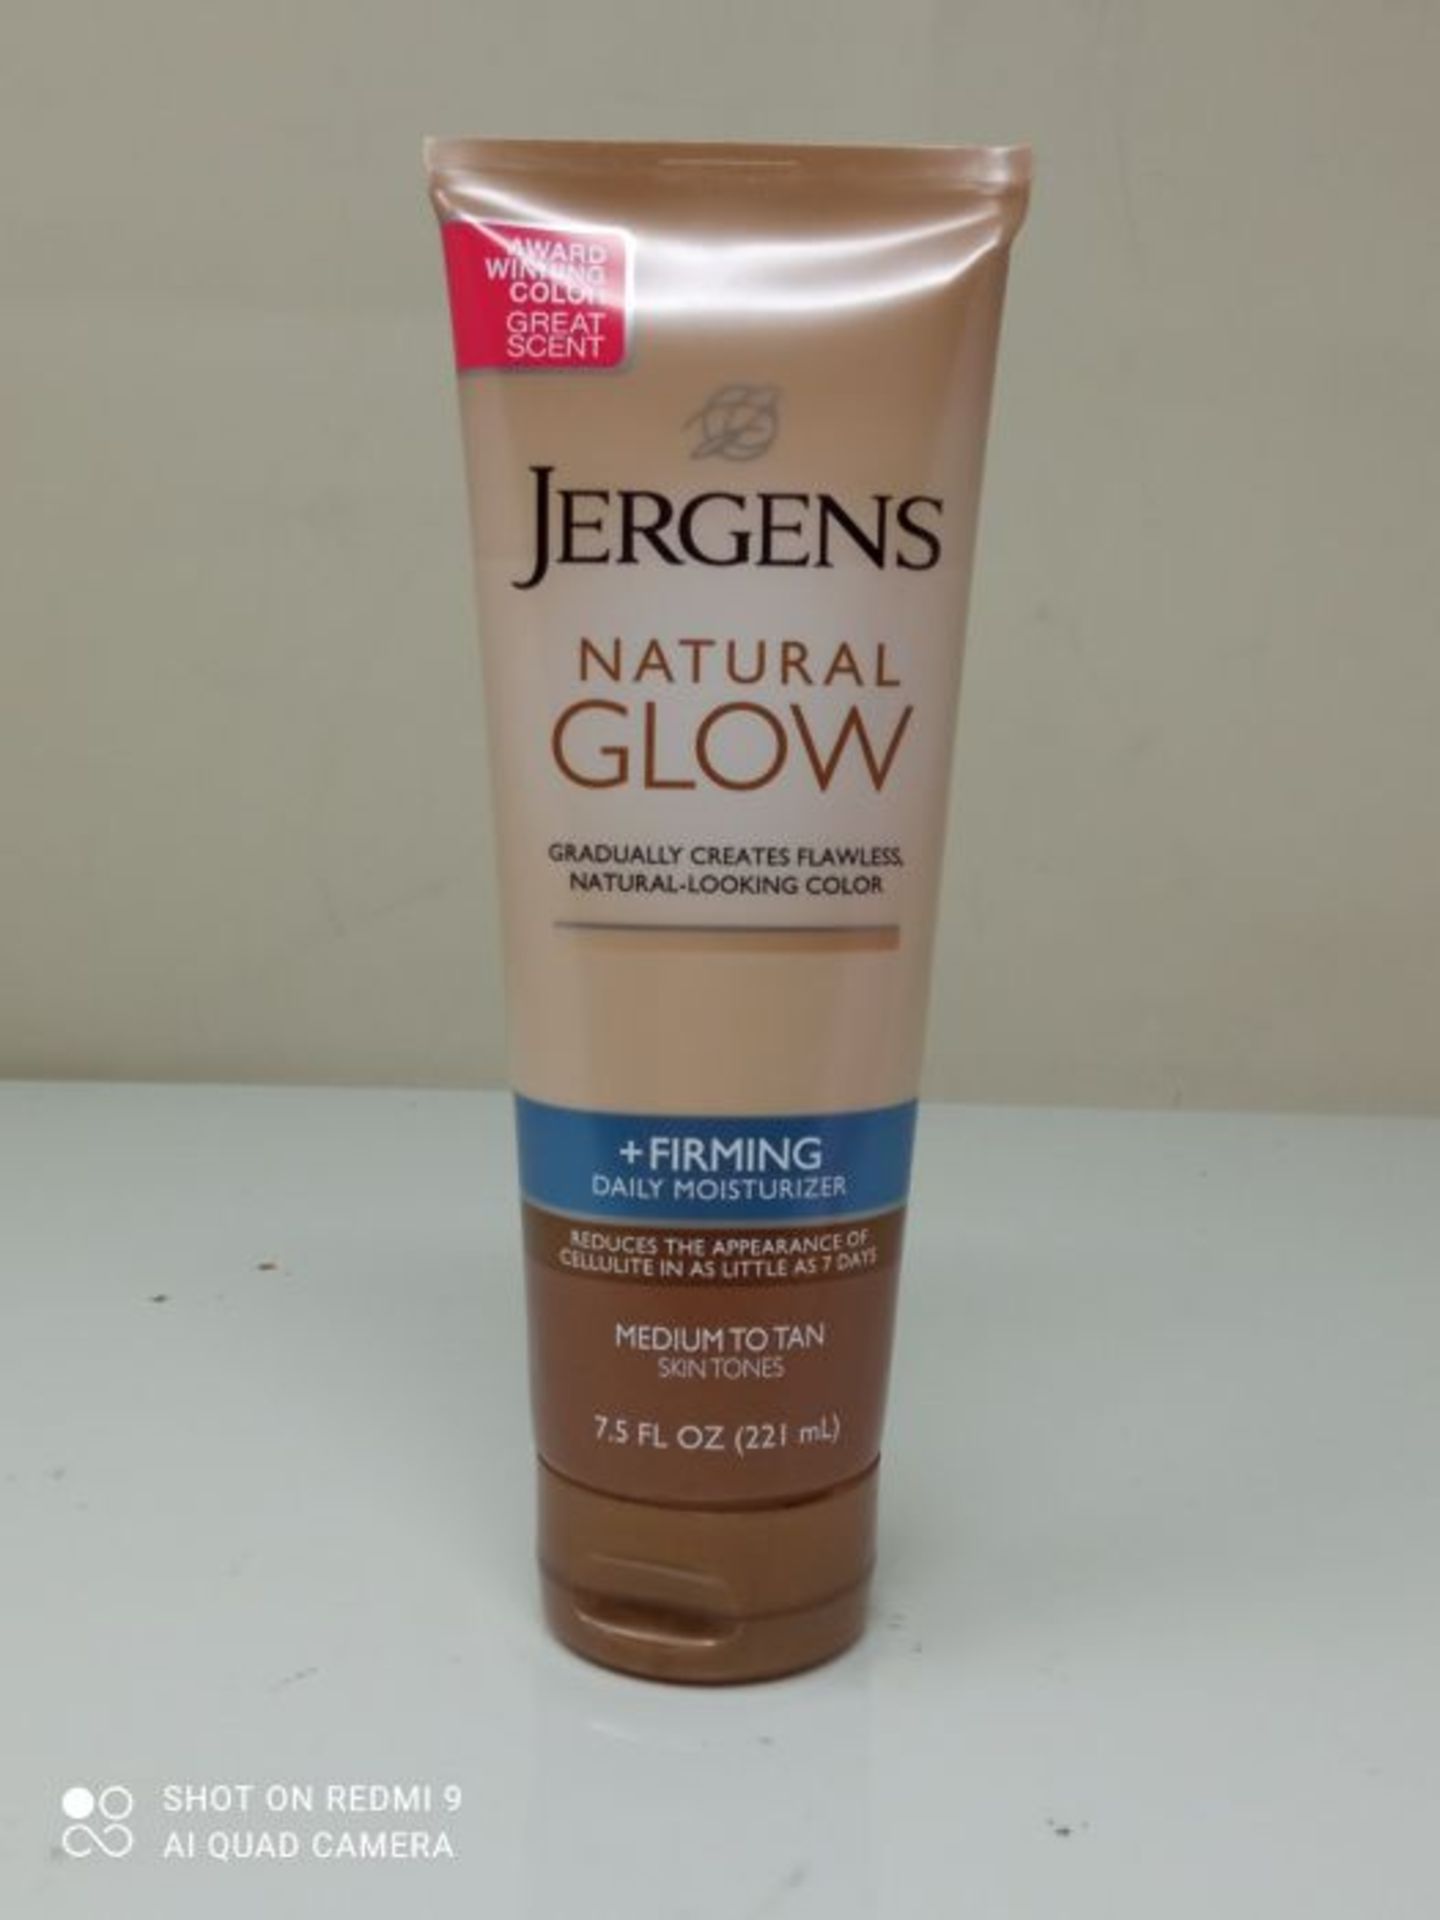 Jergens Natural Glow +FIRMING Daily Moisturizer for Body, Medium to Tan Skin Tones, 7. - Image 2 of 3